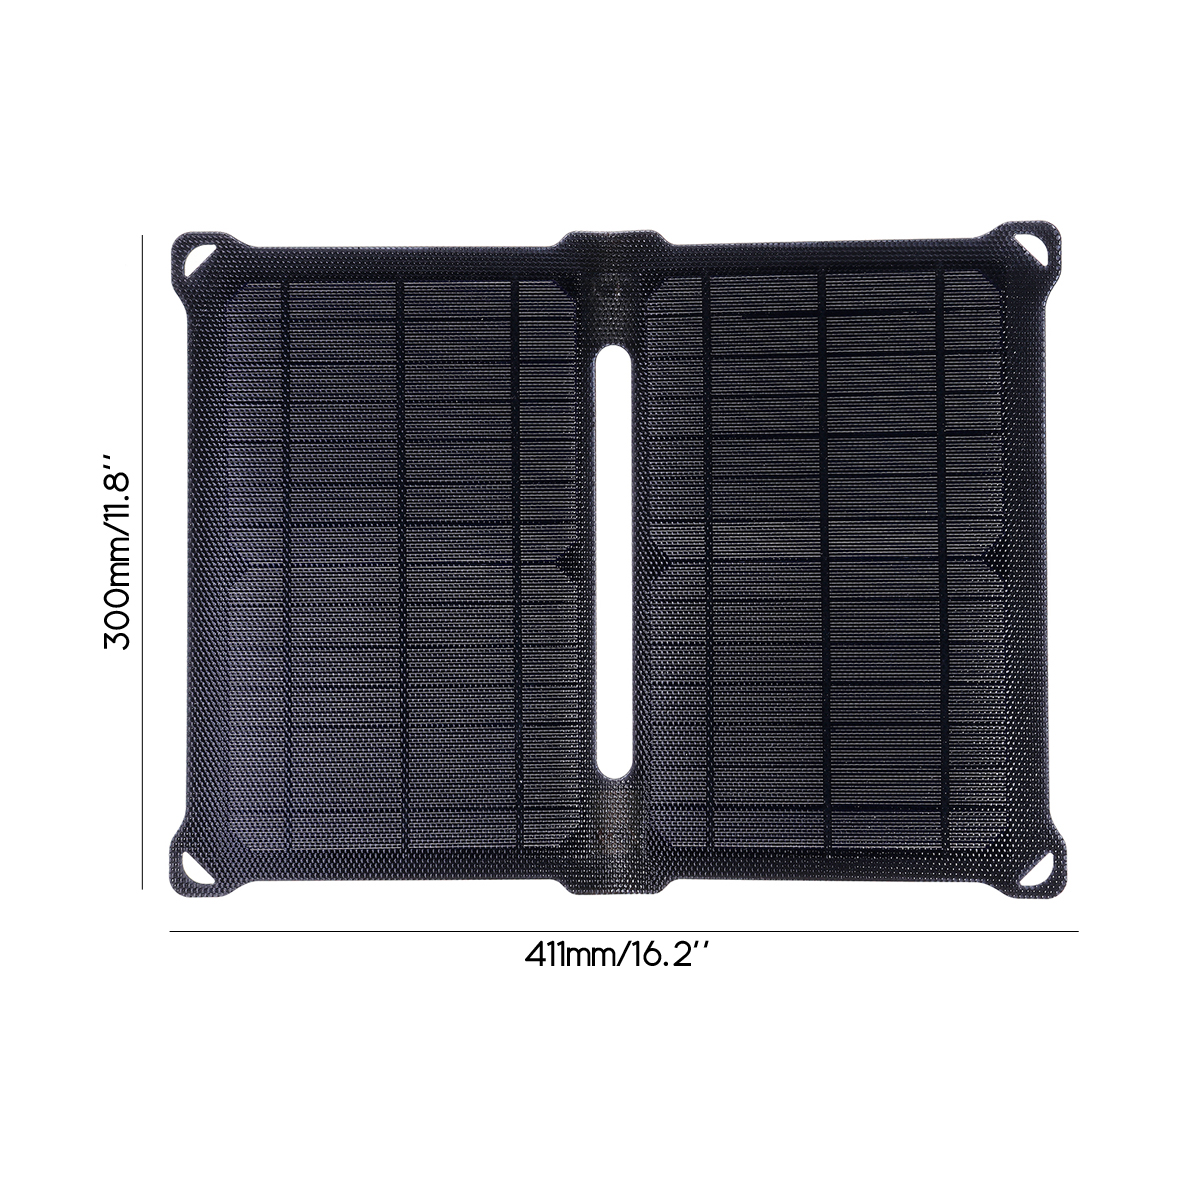 Foldable-Solar-Charger-Waterproof-ETFE-Monoctrystalline-Solar-Panel-Dual-USB-Ports-Outdoor-Camping-C-1935777-10